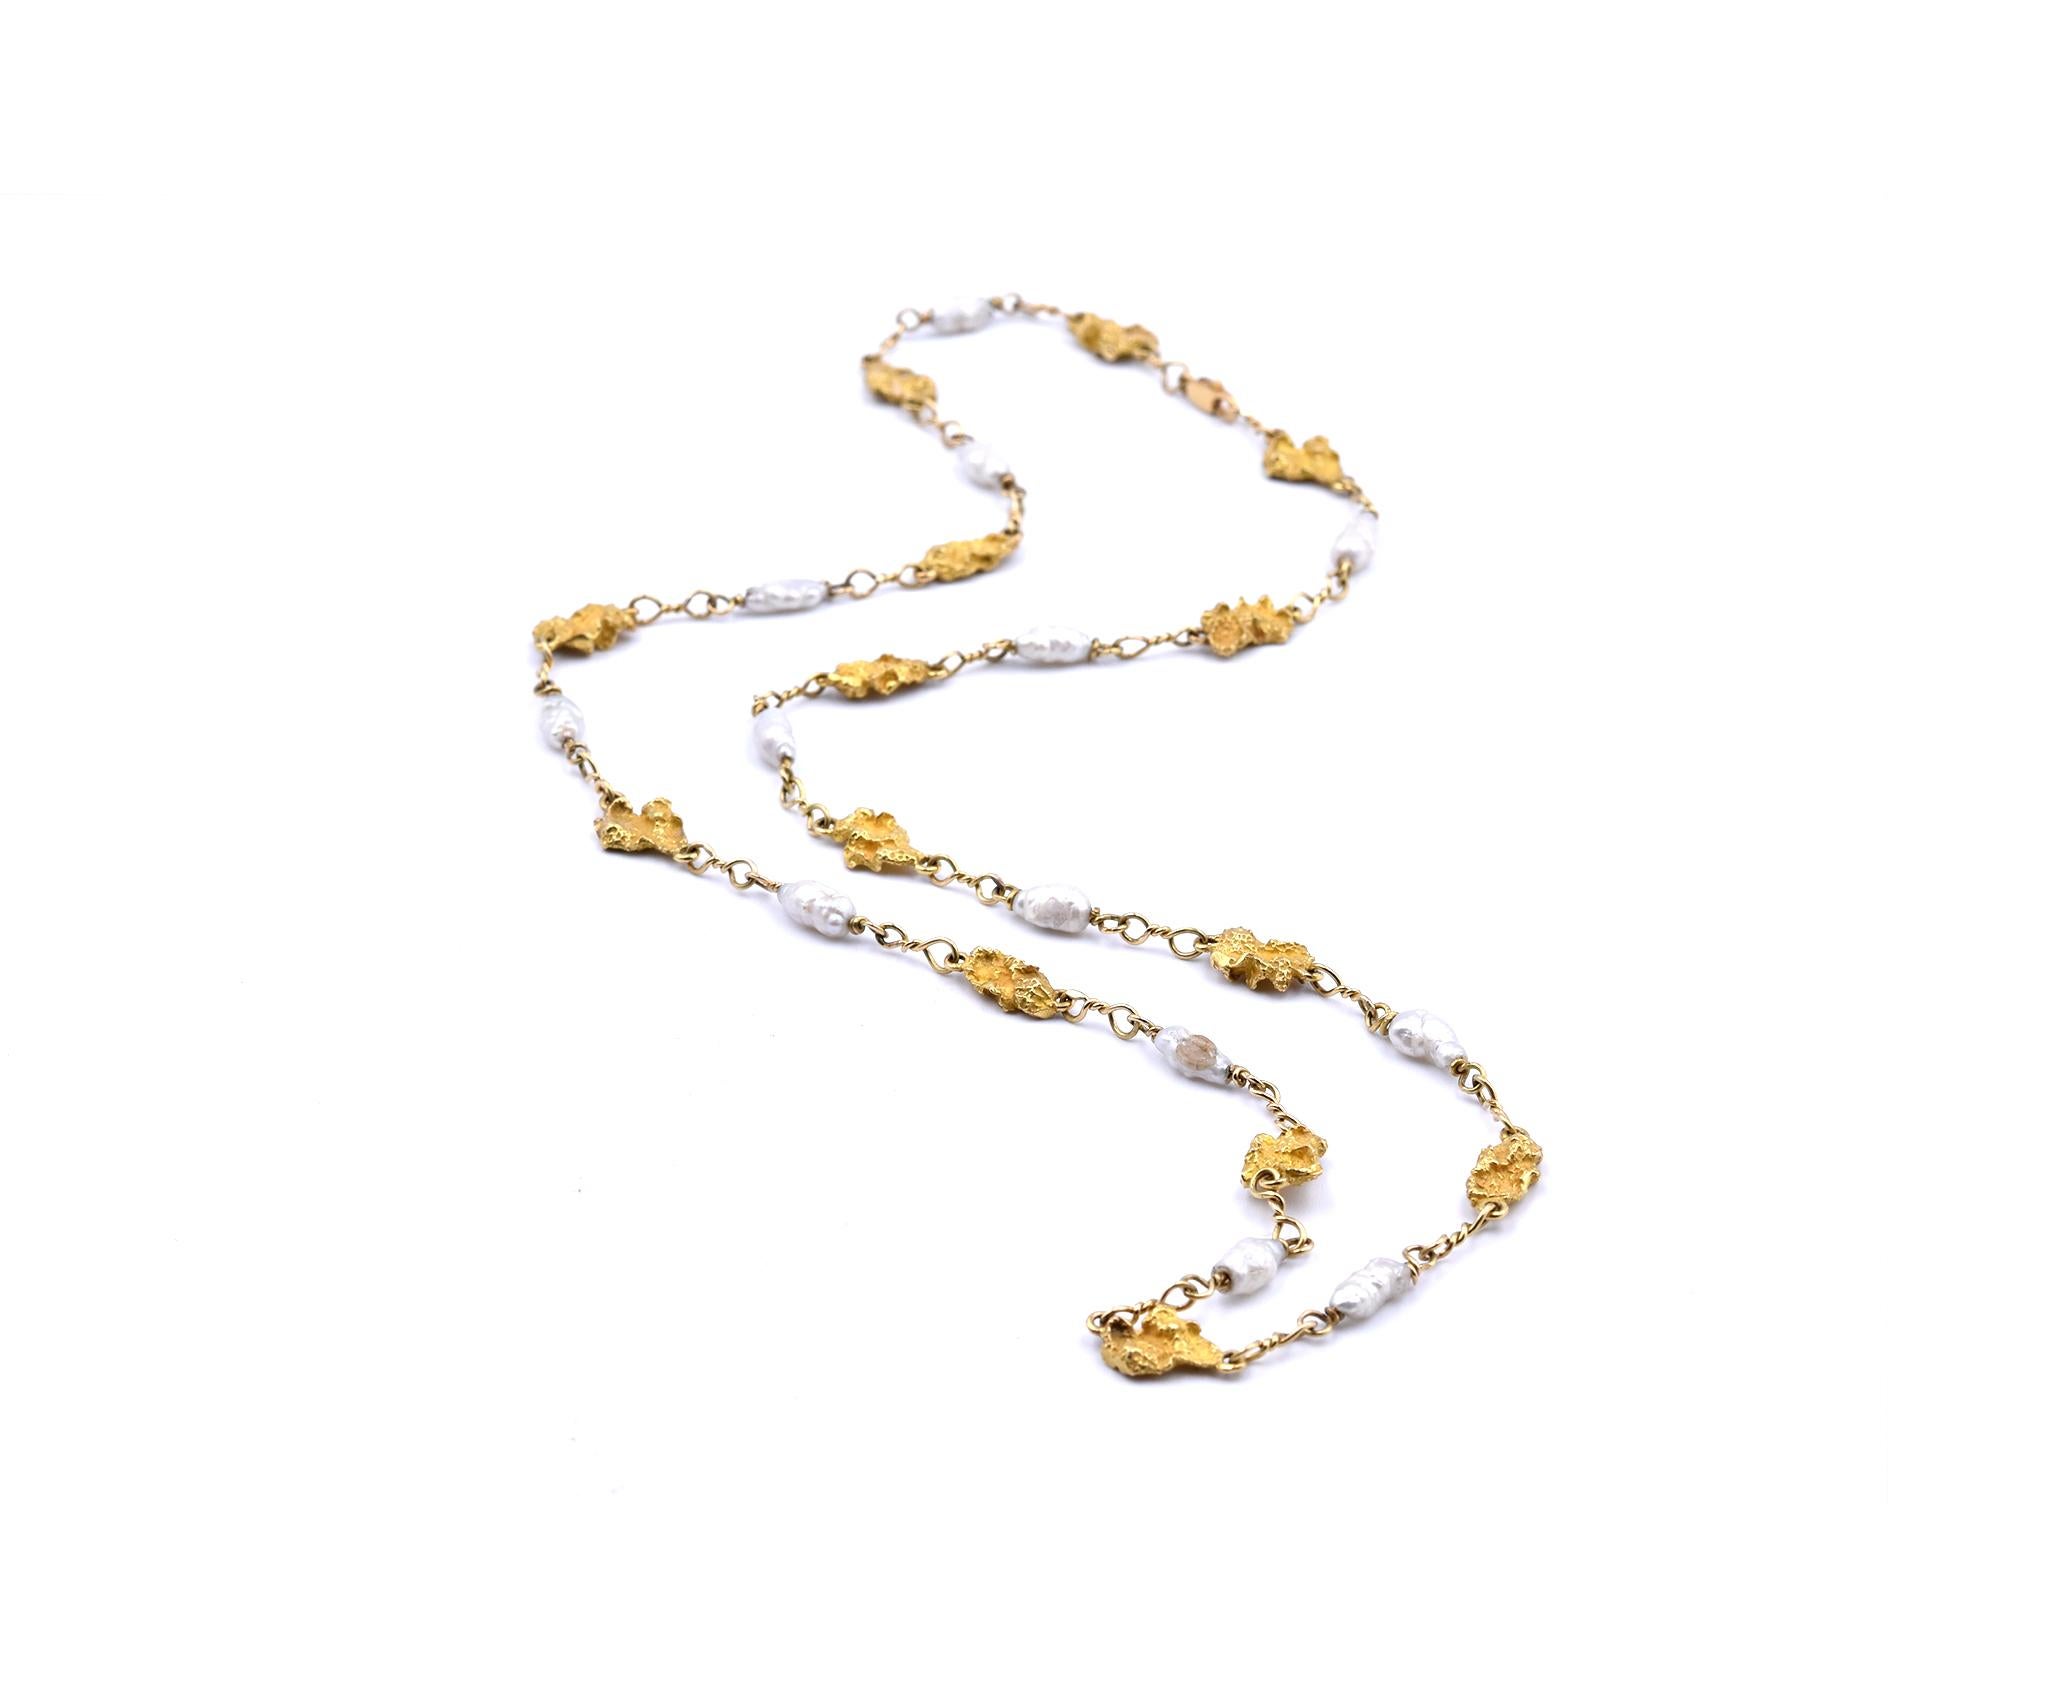 Designer: custom design
Material: 18k yellow gold 
Dimensions: necklace is 22-inches long and it is 7.10mm wide at its widest point
Weight: 18.3 grams